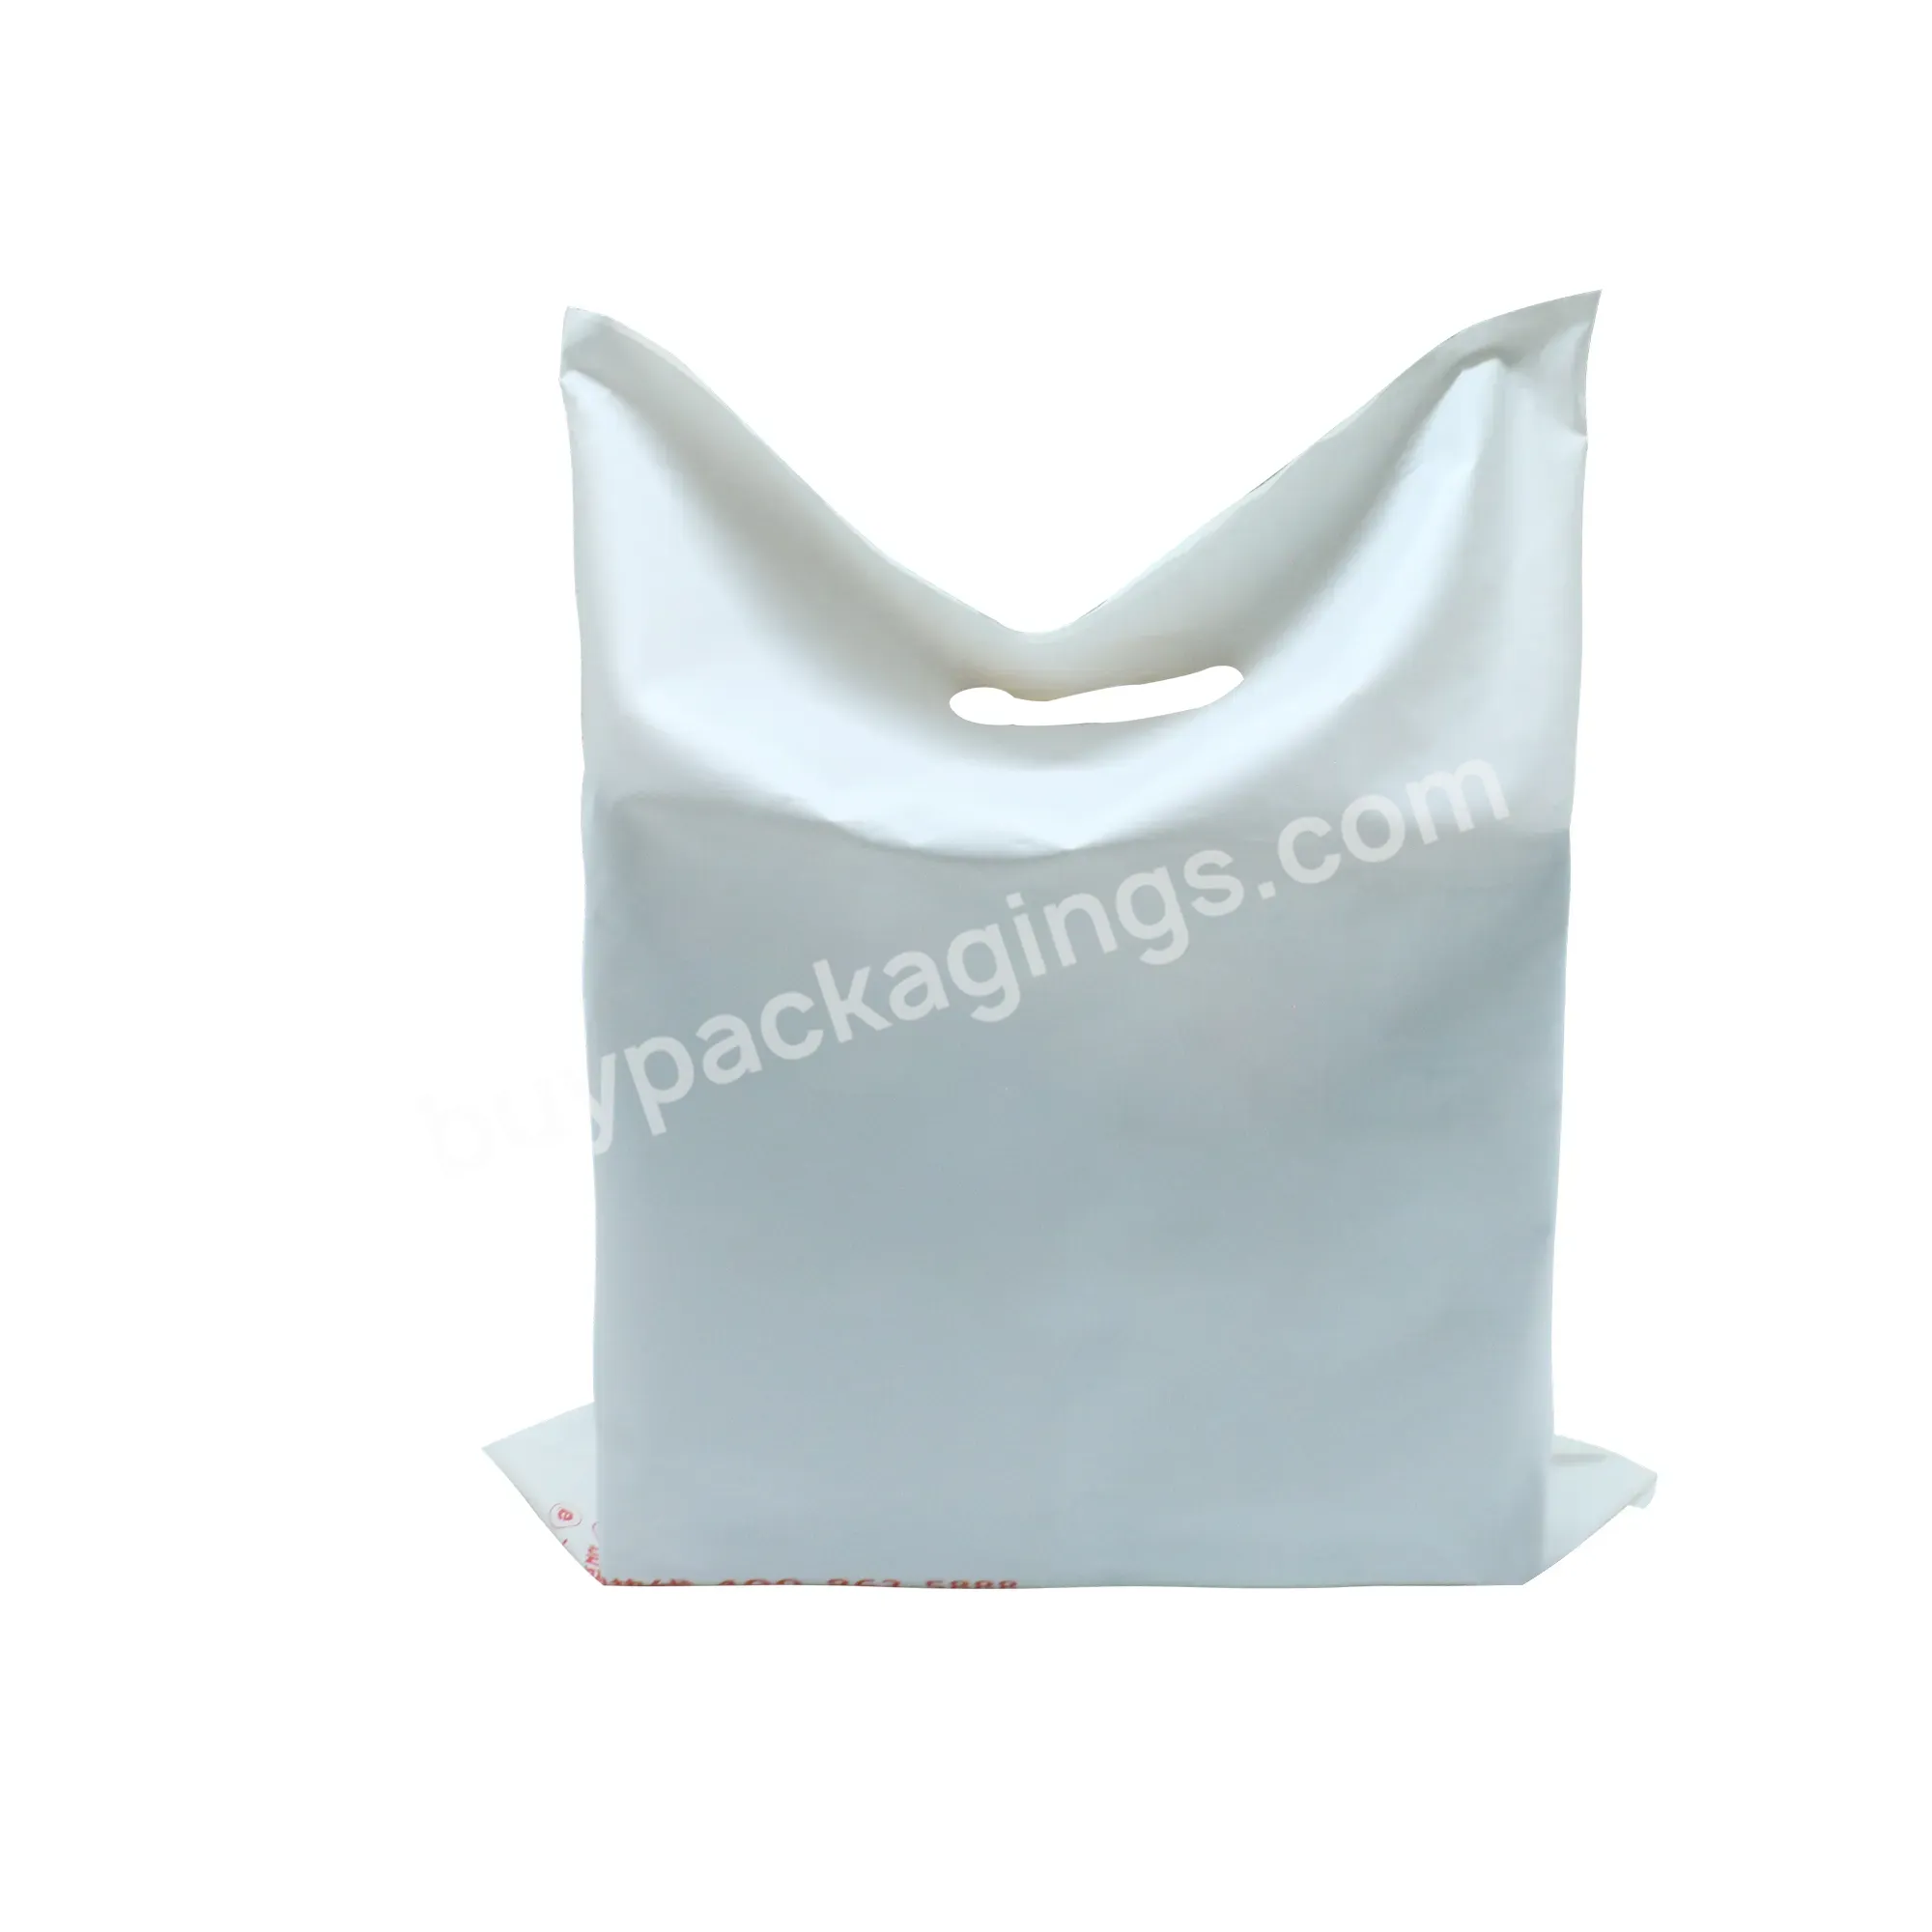 Yellow Plastic Air Express Mailing Satchel Bag For Postal Packaging & Apparel Shipping Bags For Clothing - Buy Grey Plastic Mailing Bags,Packaging Bag For Clothes,Apparel Shipping Bags.